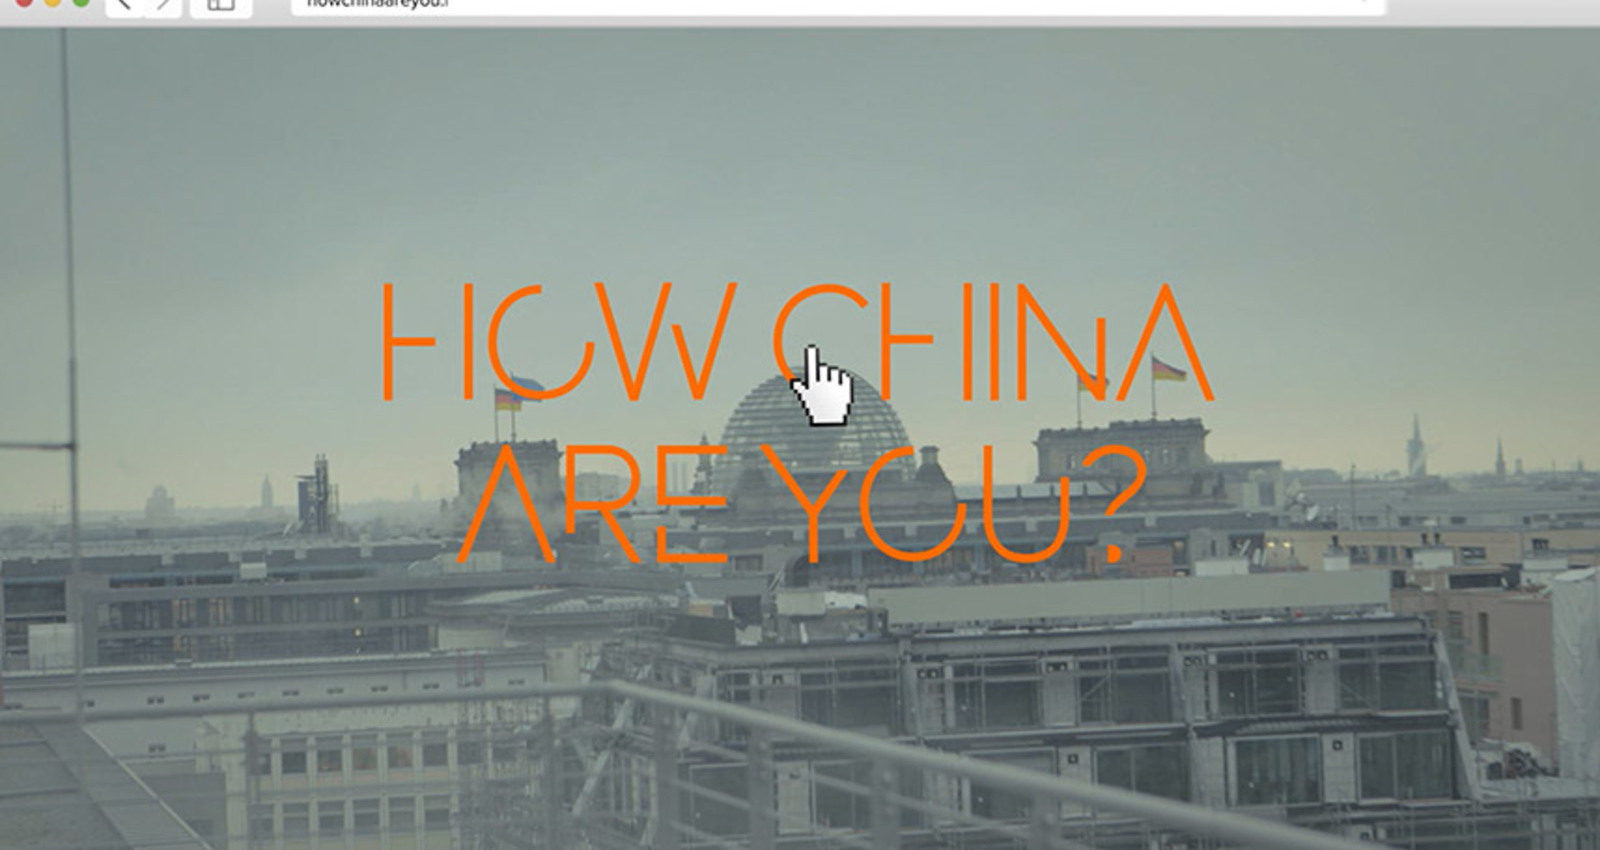 How China Are You?